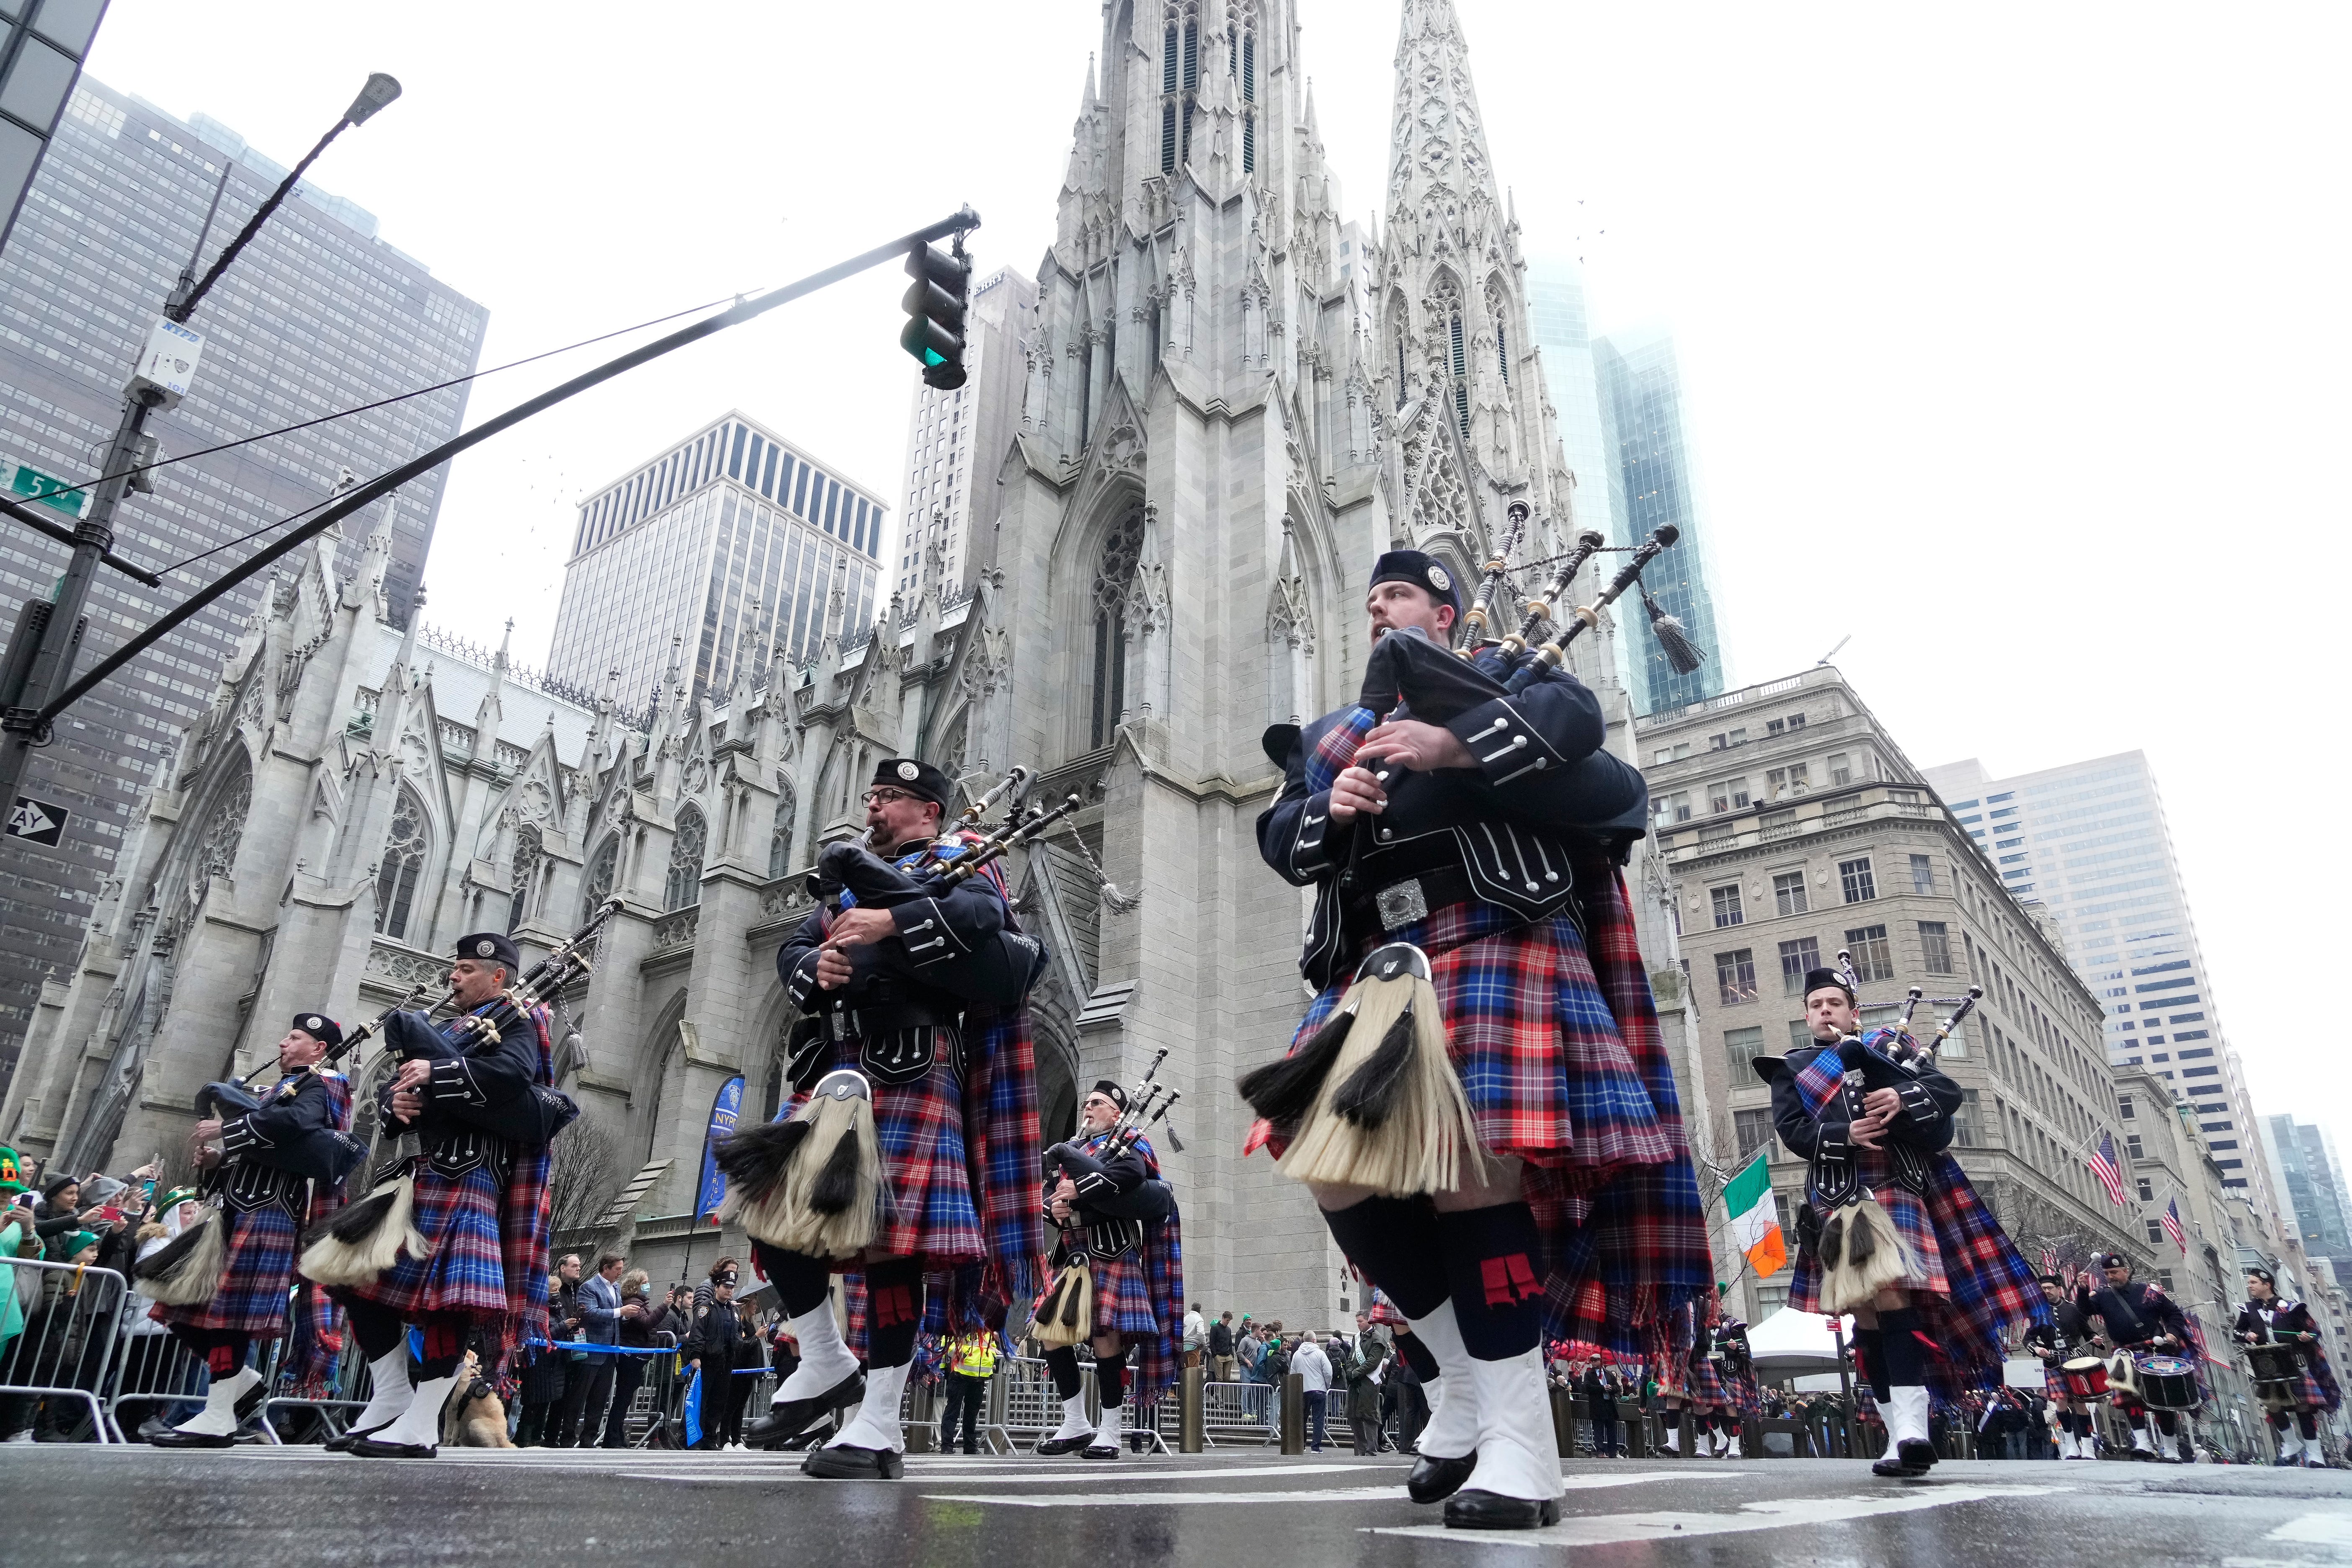 The Wantaugh Pipe Band marches in front of St. Patrick